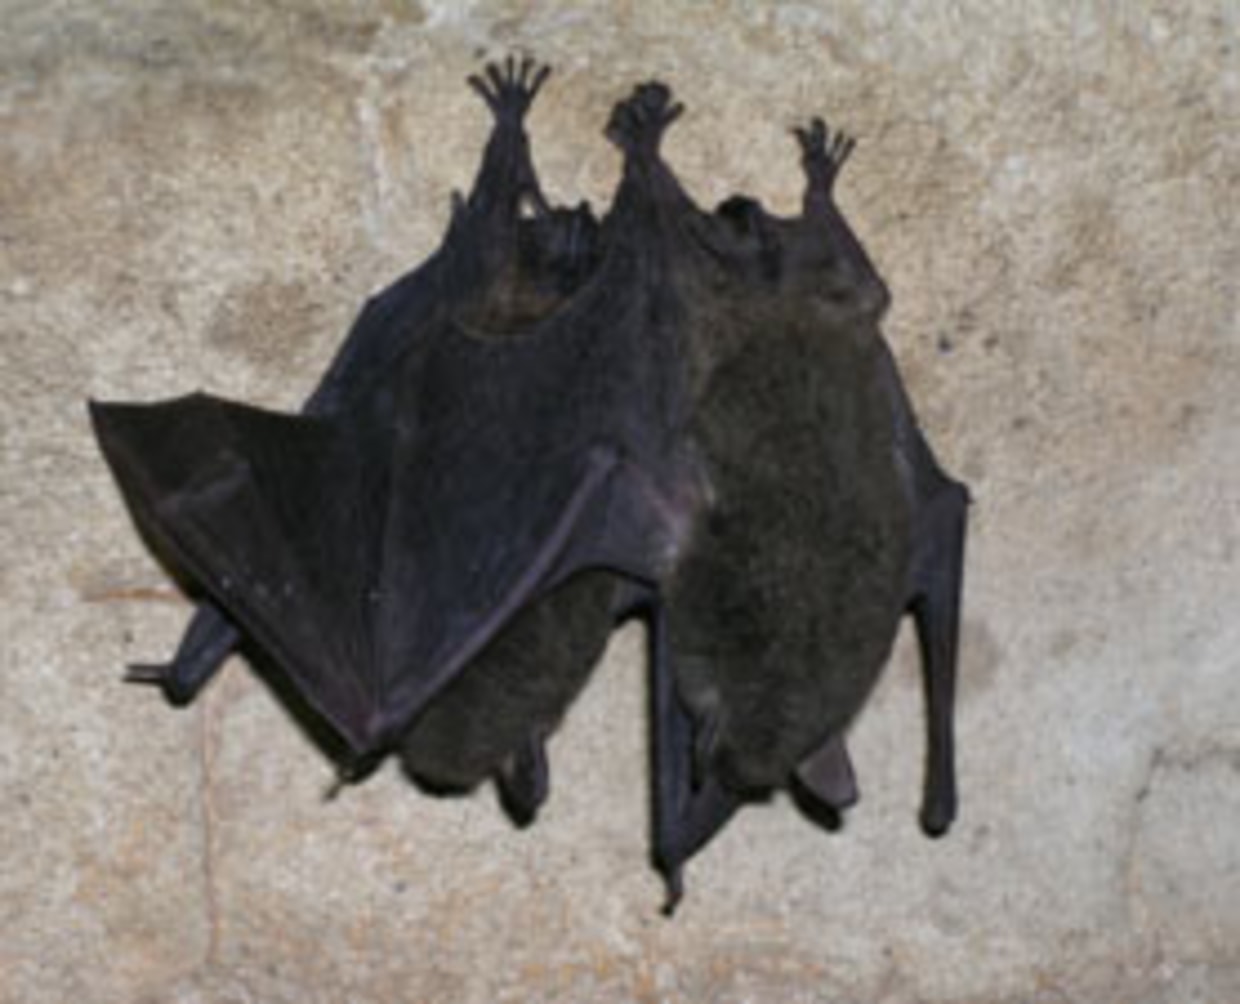 Bats like to hang out with their friends, too